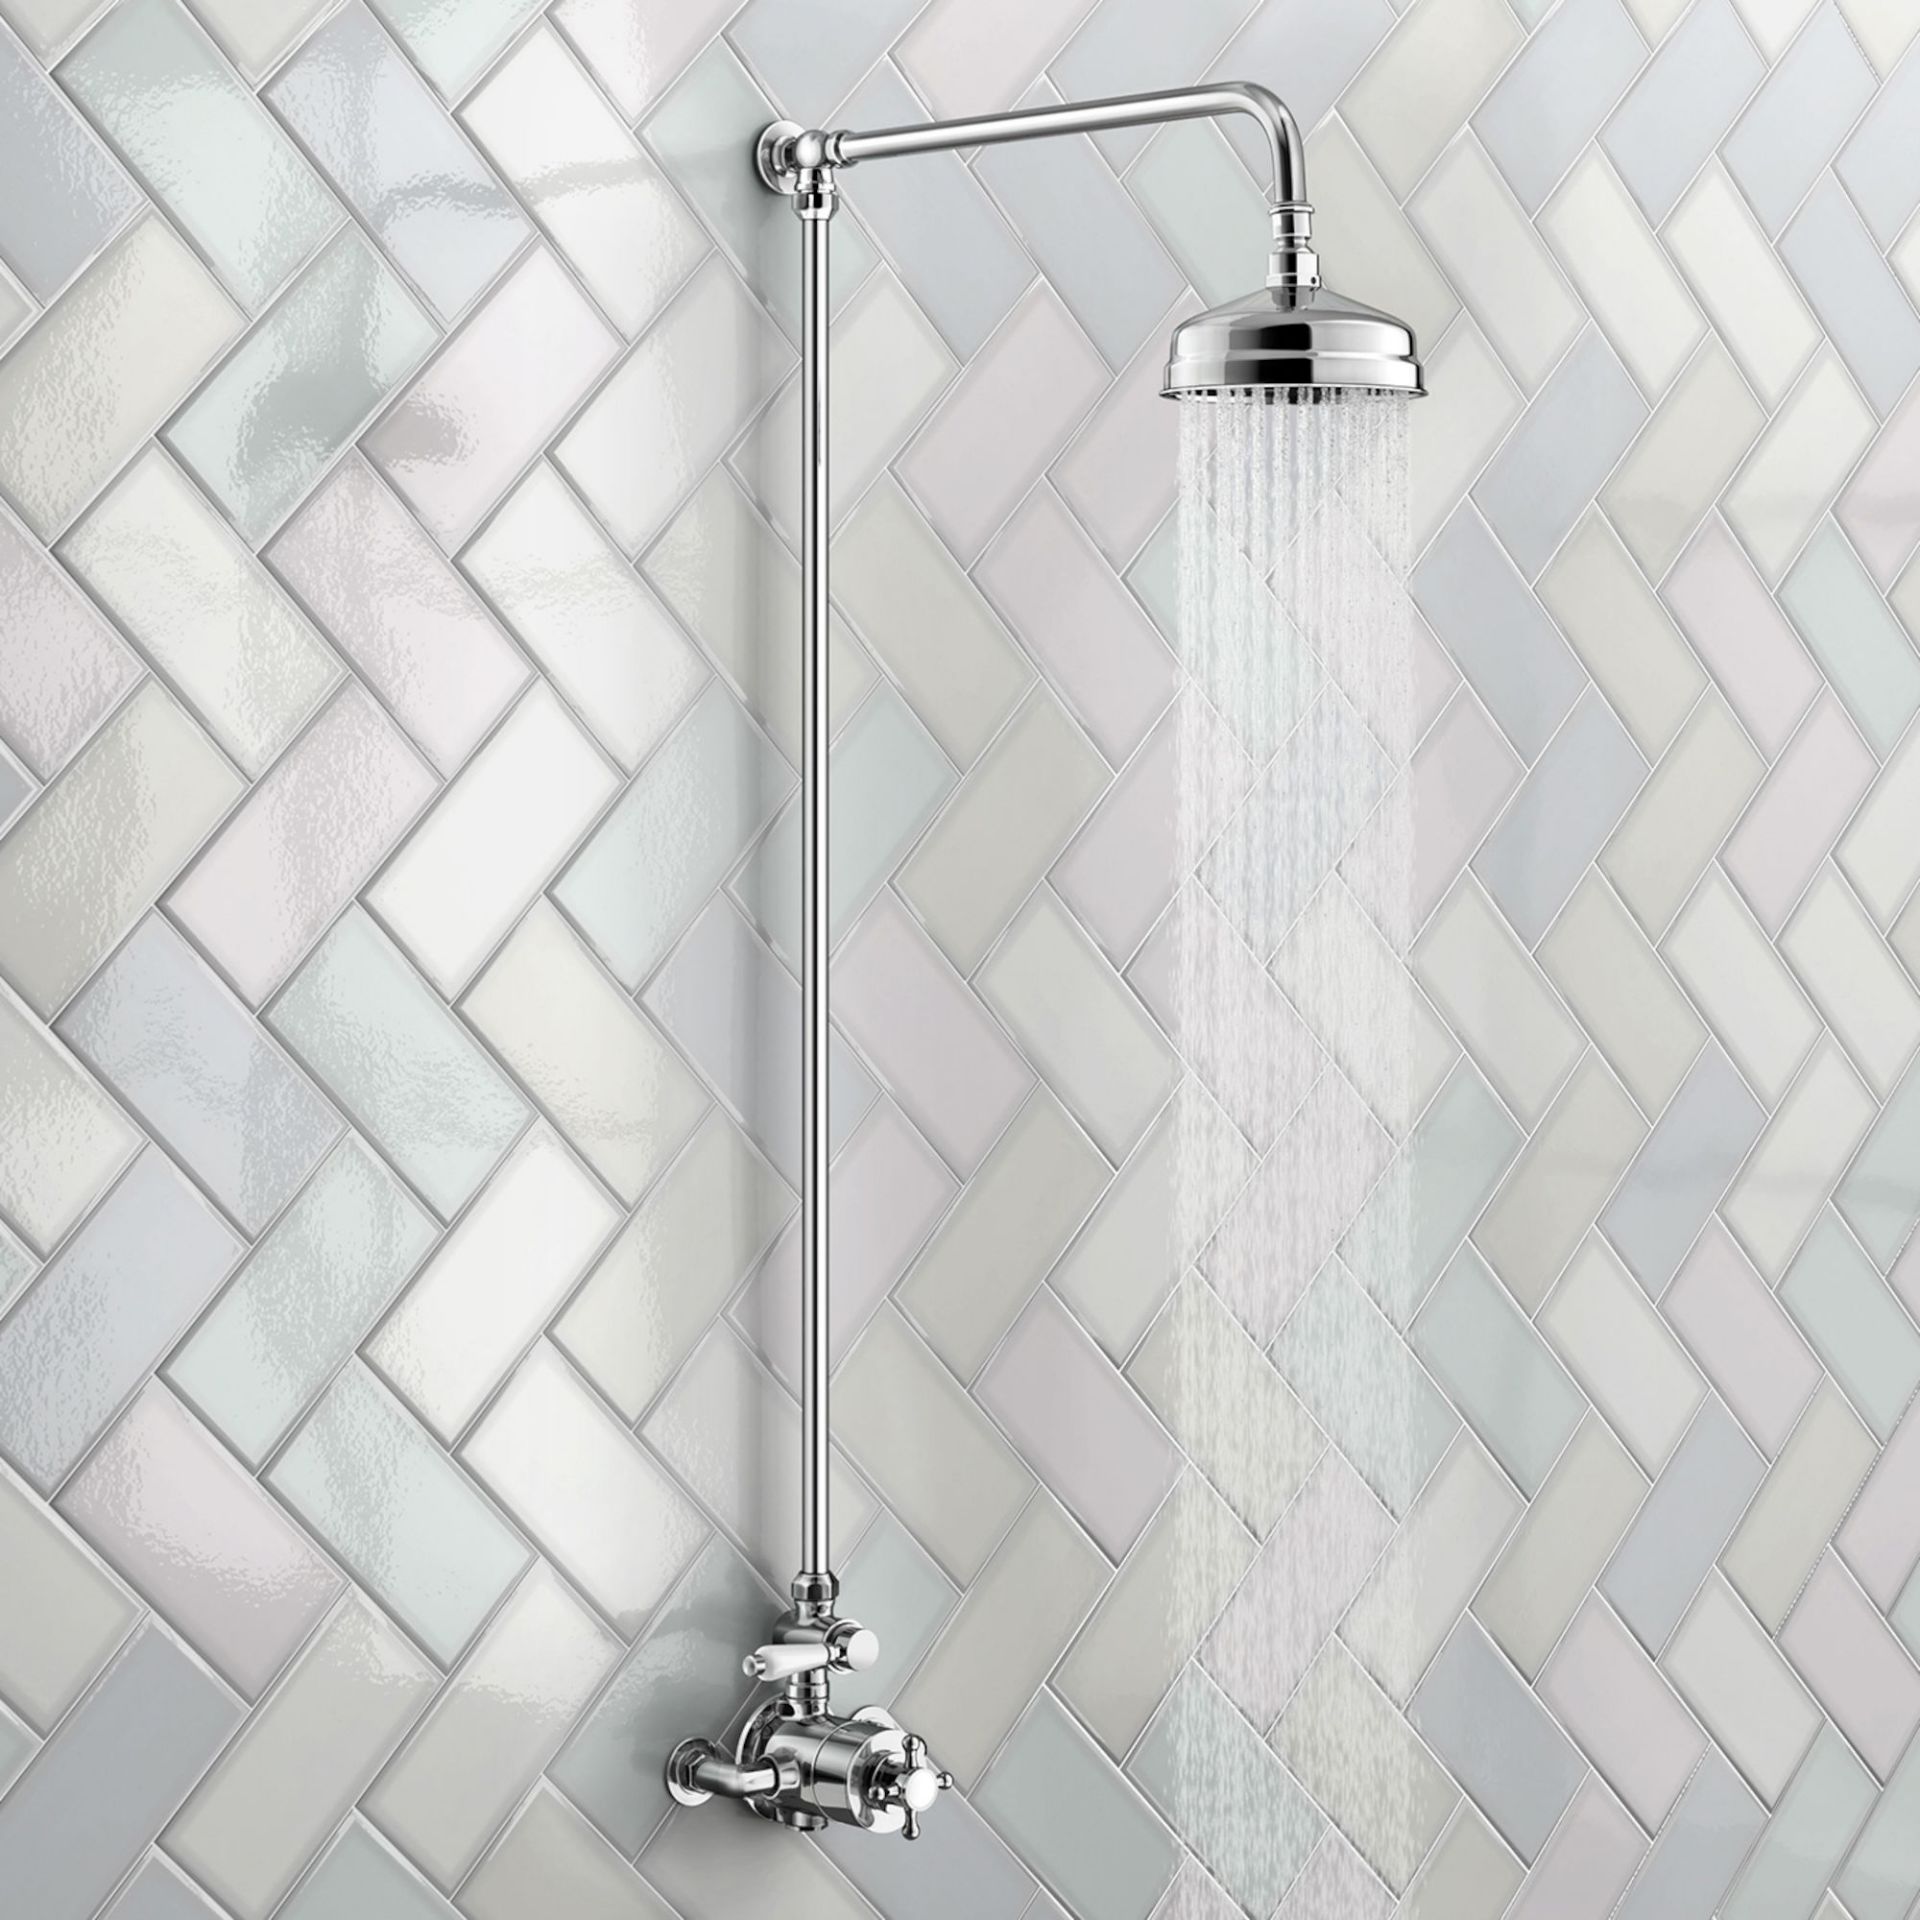 (EW66) Traditional Exposed Thermostatic Shower Kit & Medium Head. Traditional exposed valve - Image 2 of 4